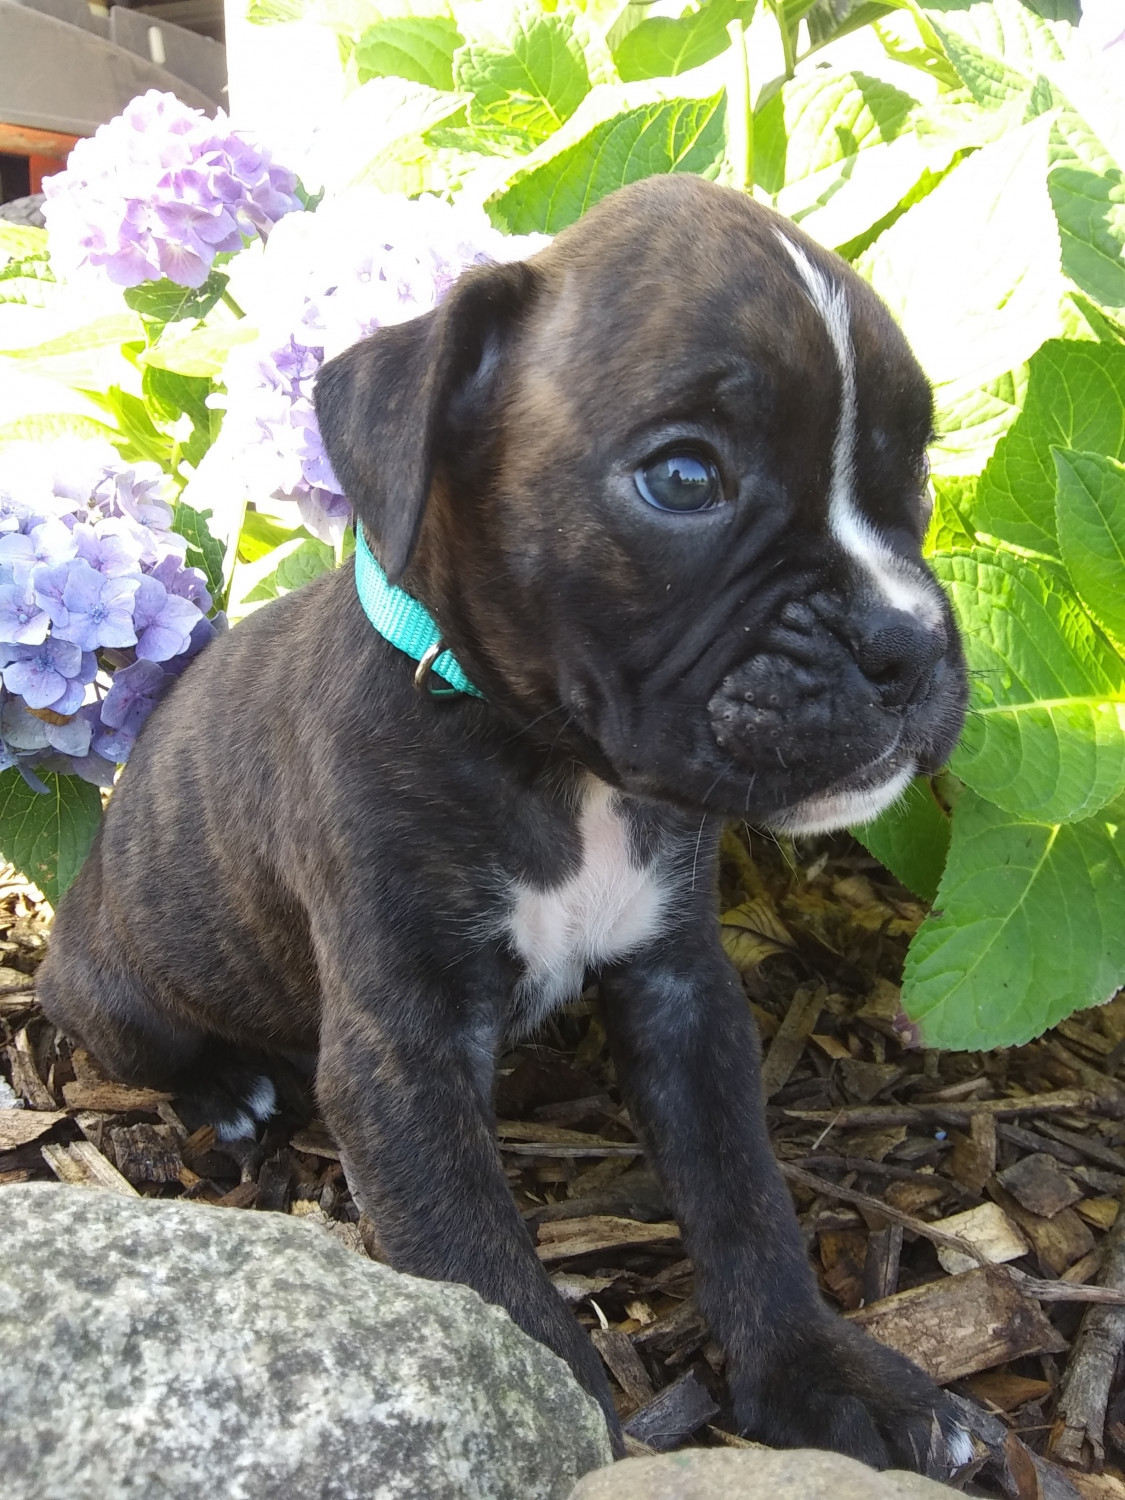 boxer puppy for sale